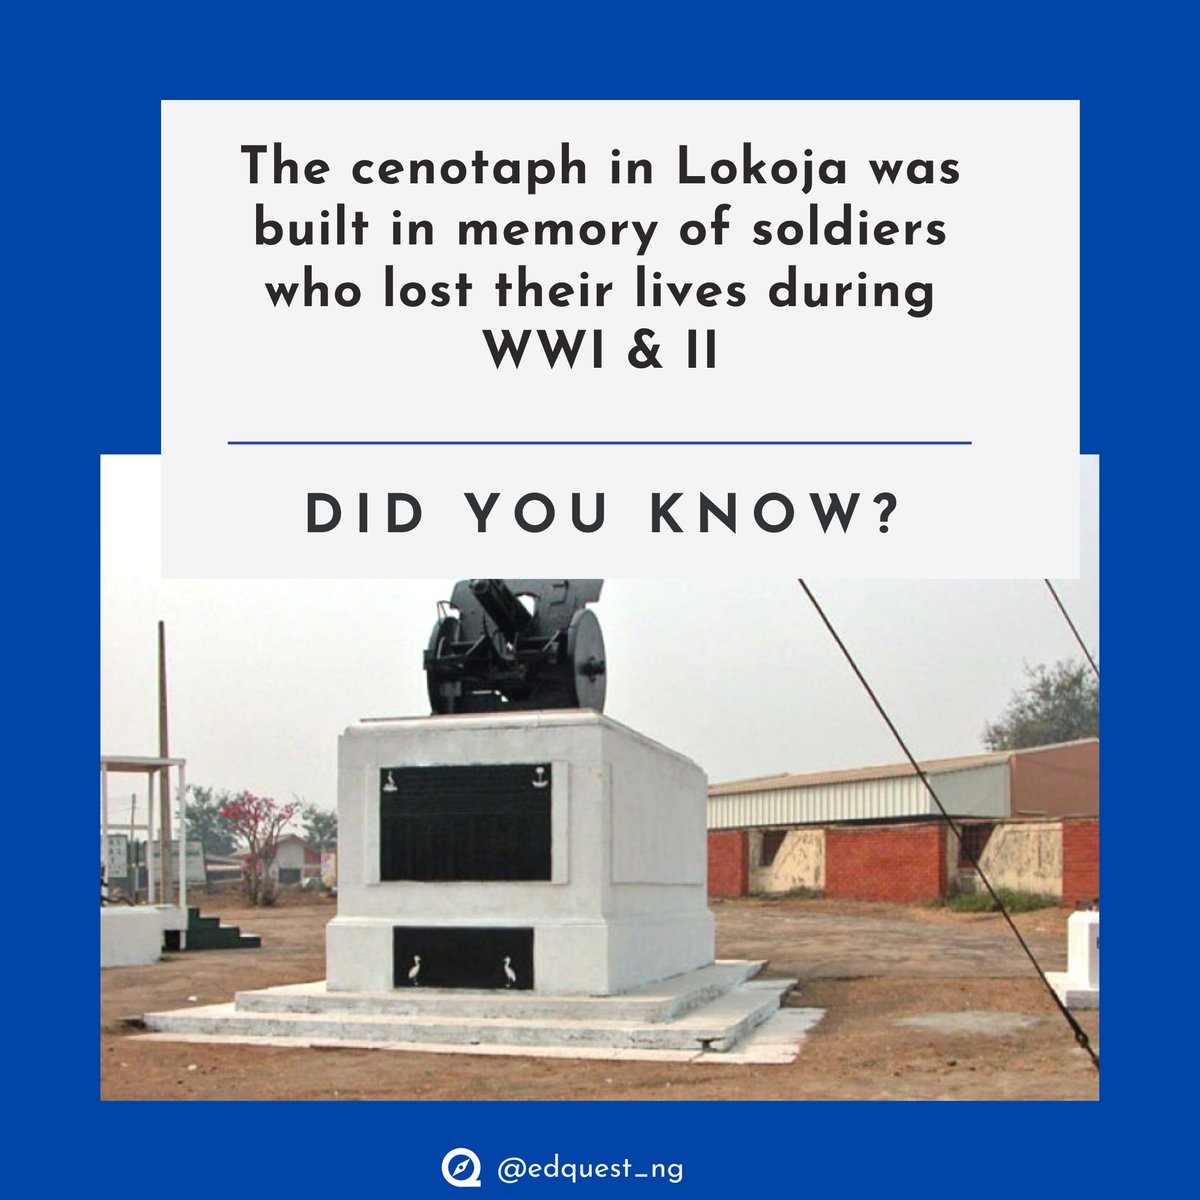 The centotaph was built in remembrance of our fallen heroes. It was built in 1995 and is located along Murtala Mohammed way in Lokoja, Kogi state.

#EdQuest #Learnwithedquest #NigerianHistory #WWI #WWII #Nigeria